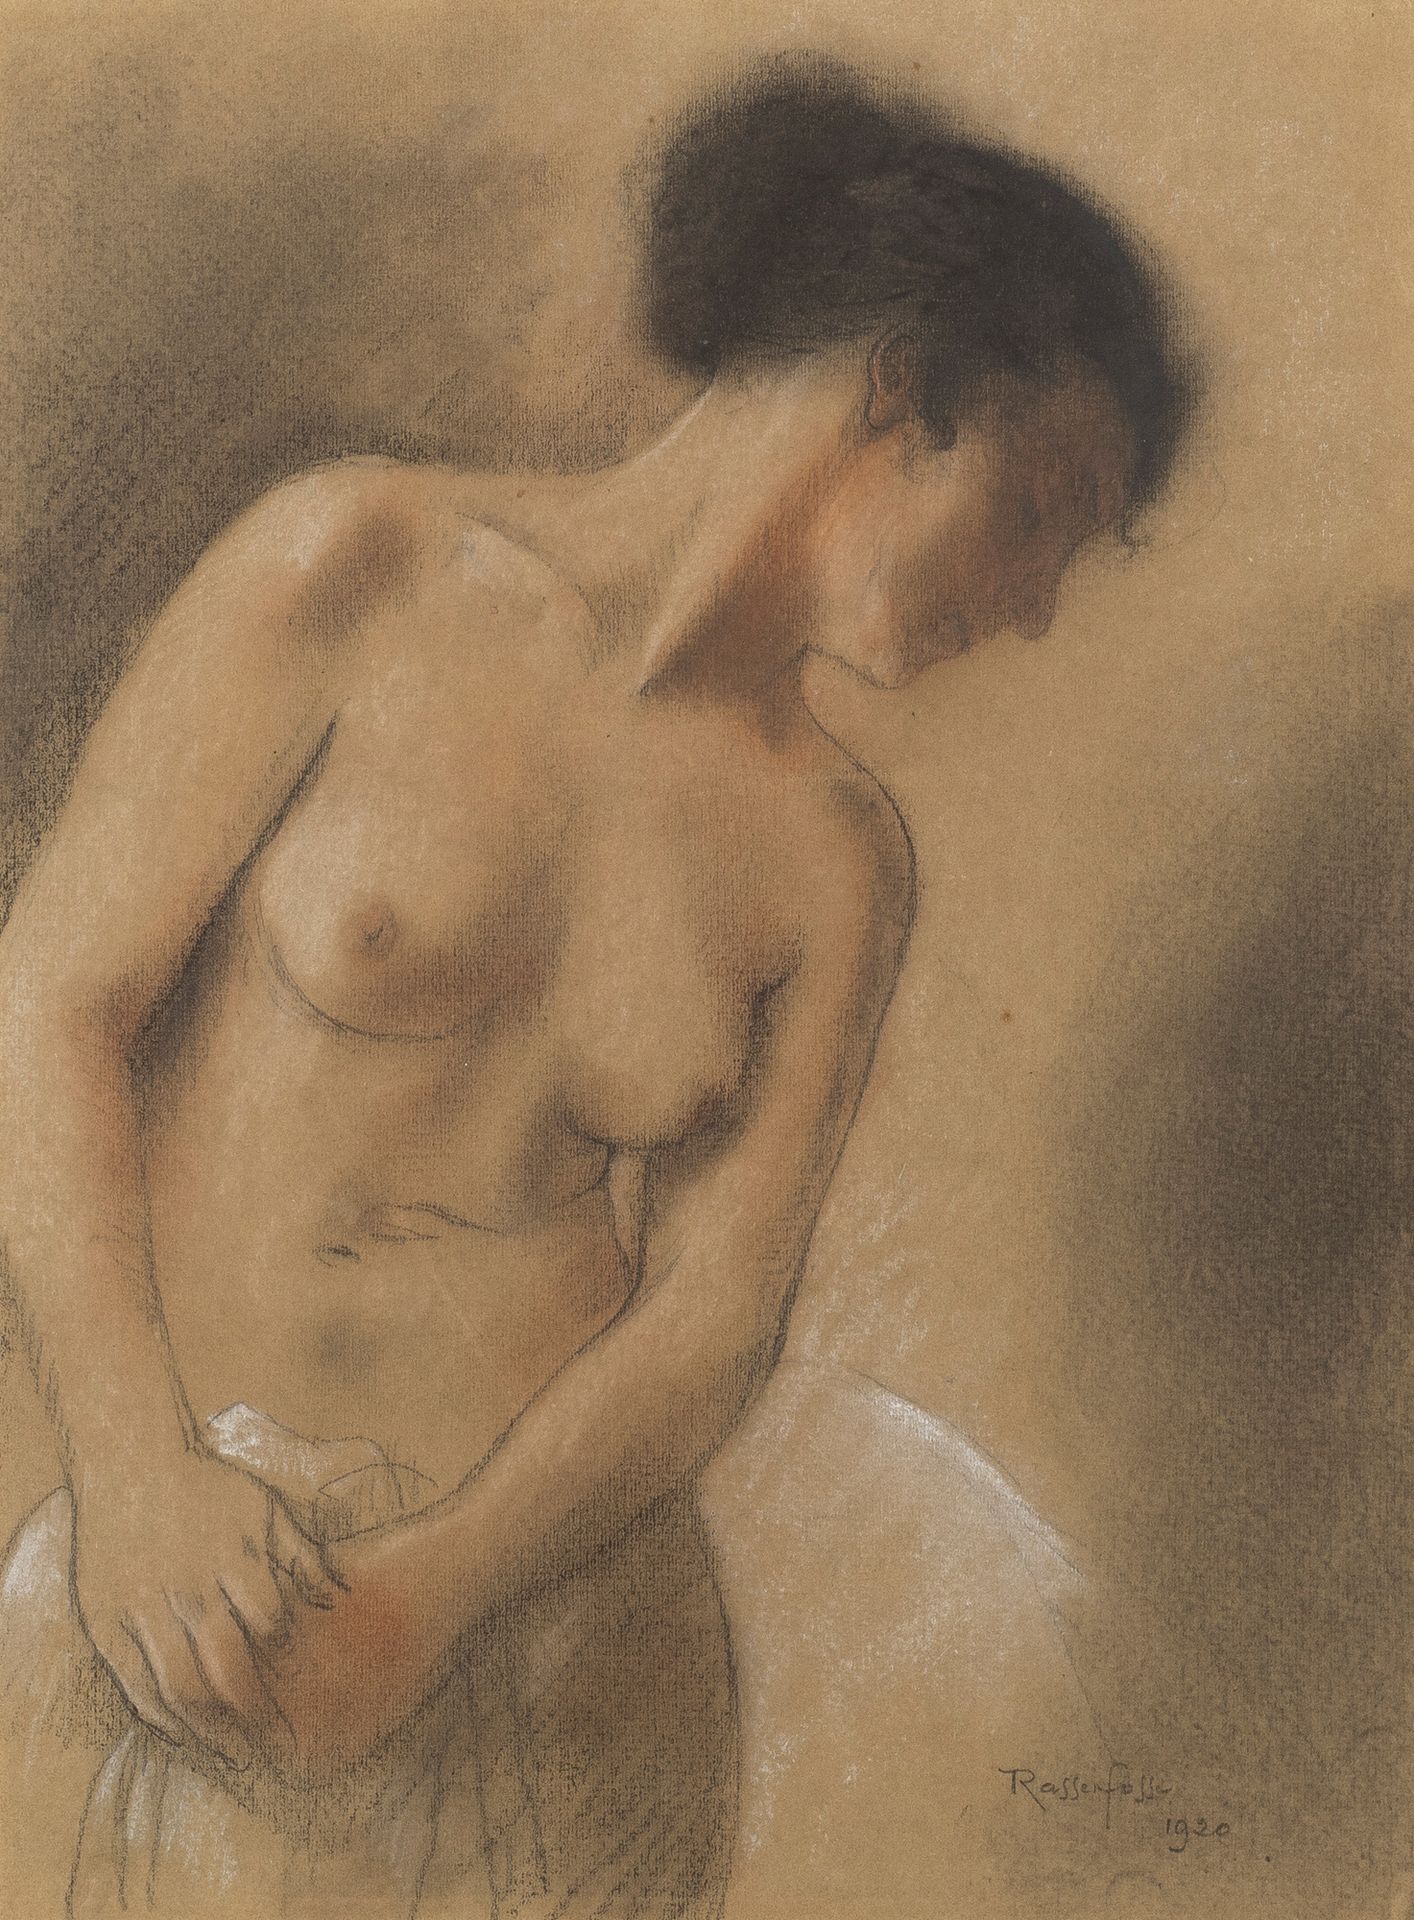 Armand Rassenfosse (1862-1934) Naked Woman, 1920
Pasel and grease pencil on pape&hellip;